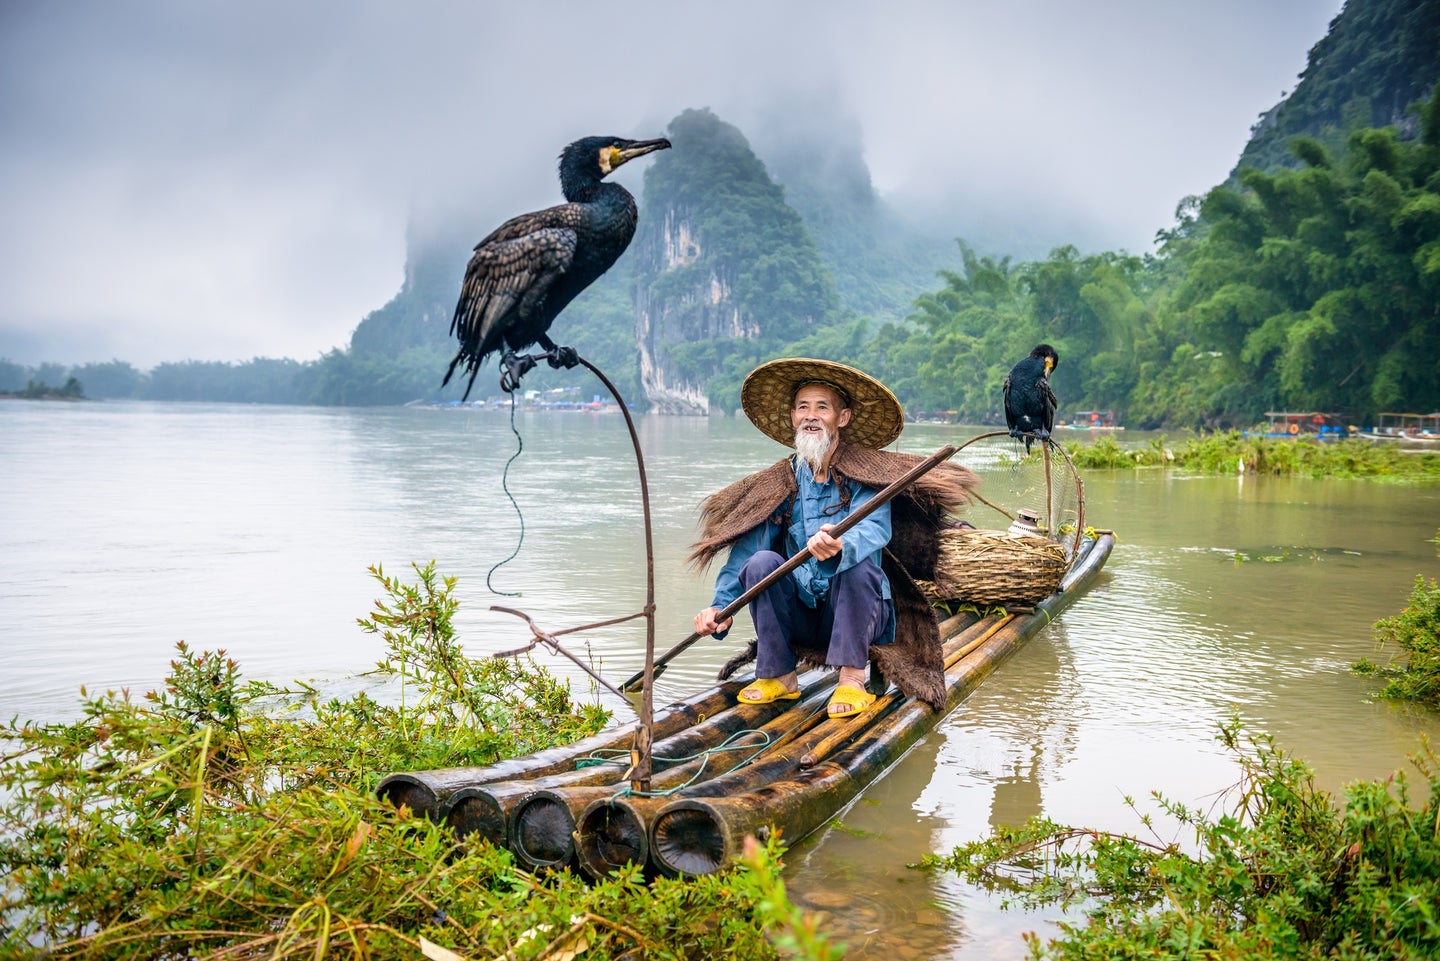 Chinese fisher with two cormorant birds in a boat in front of a mountain